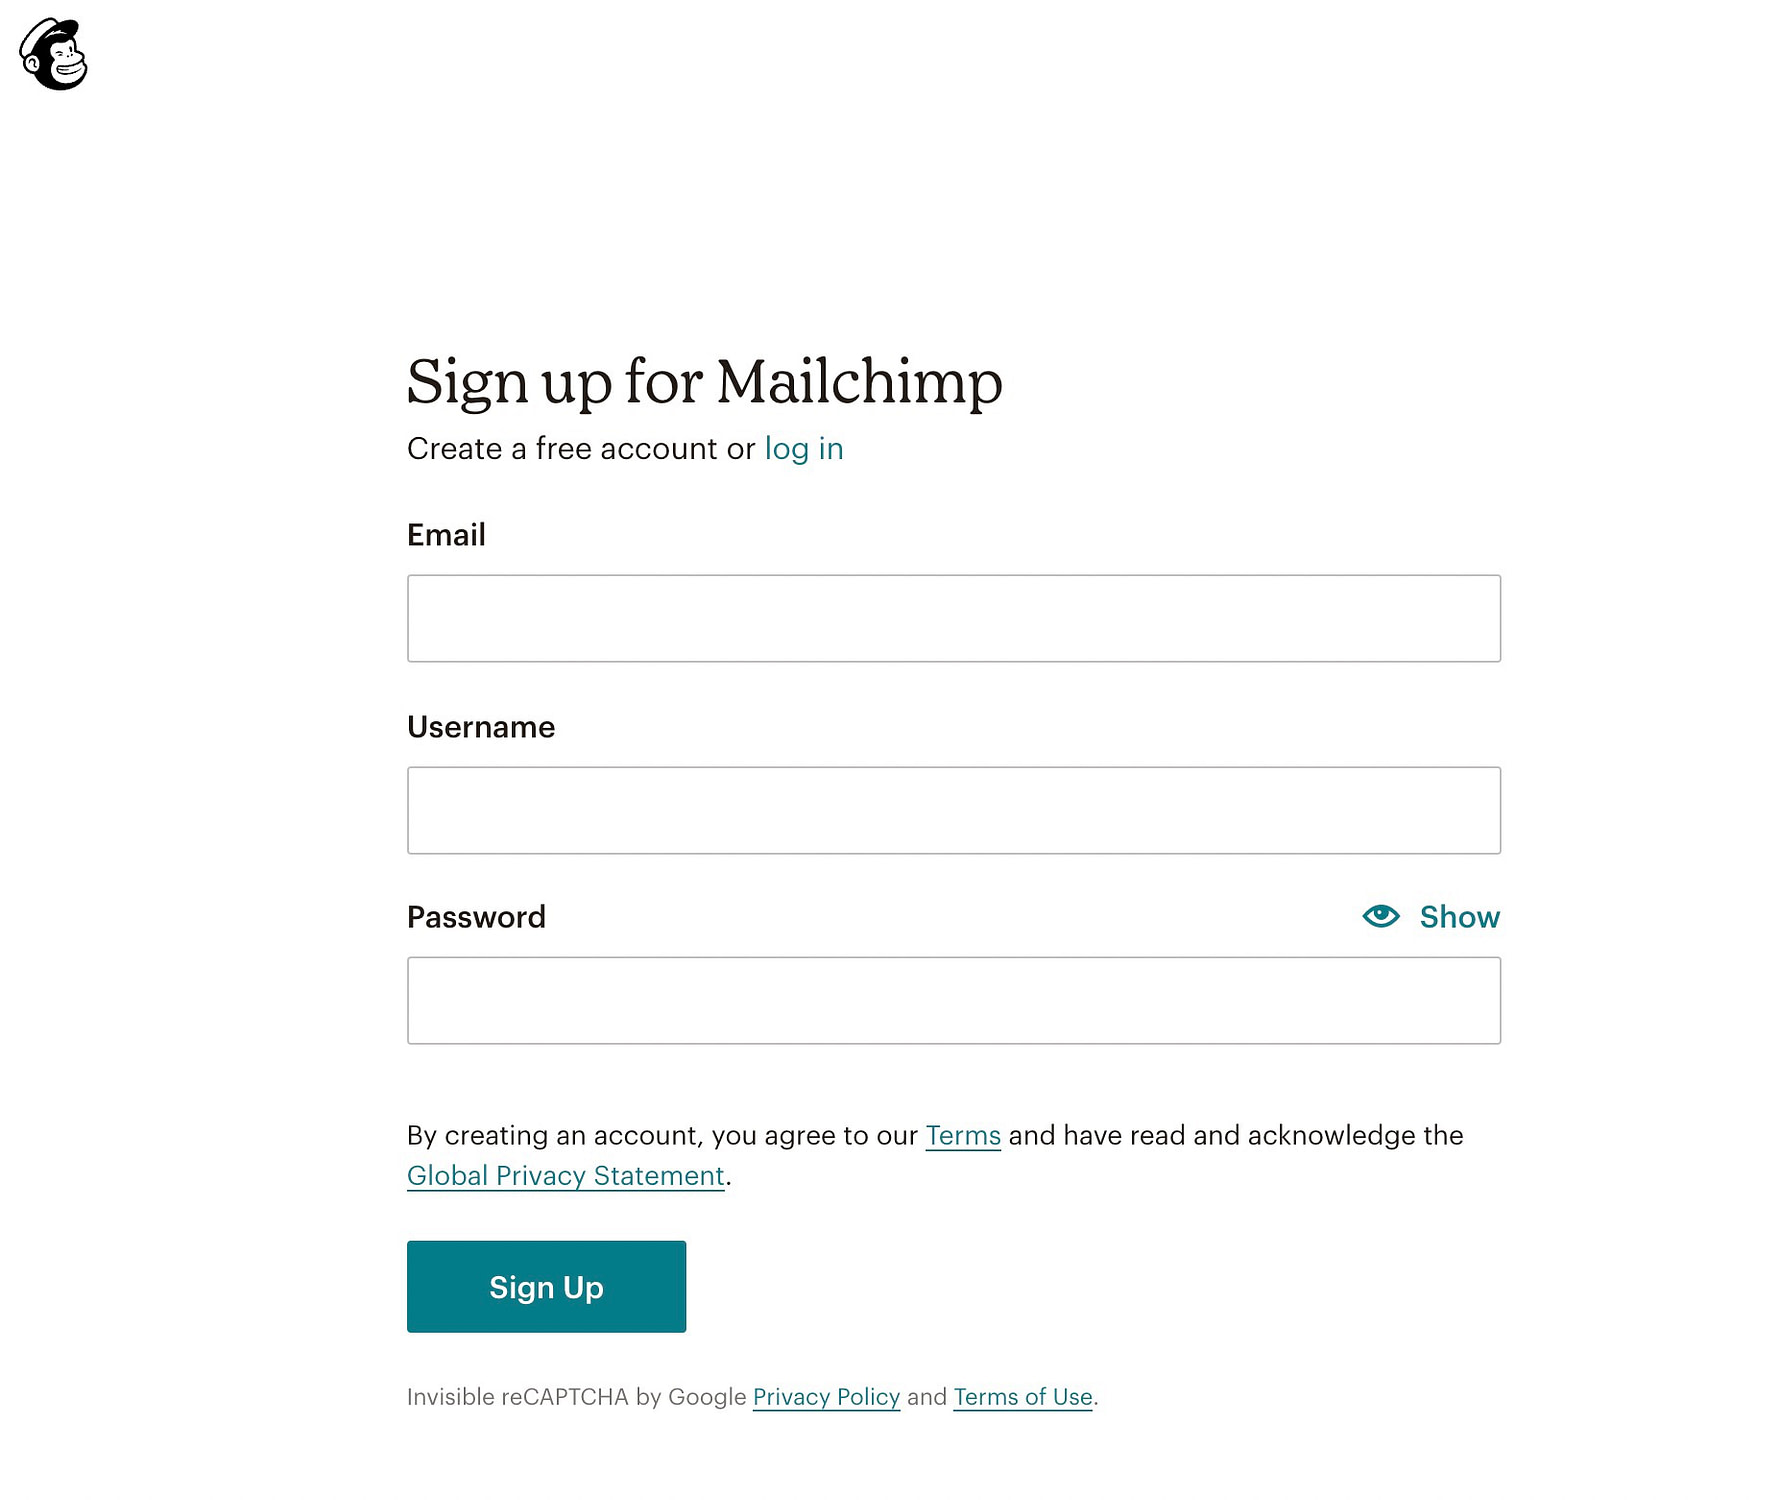 signing up for a mailchimp account